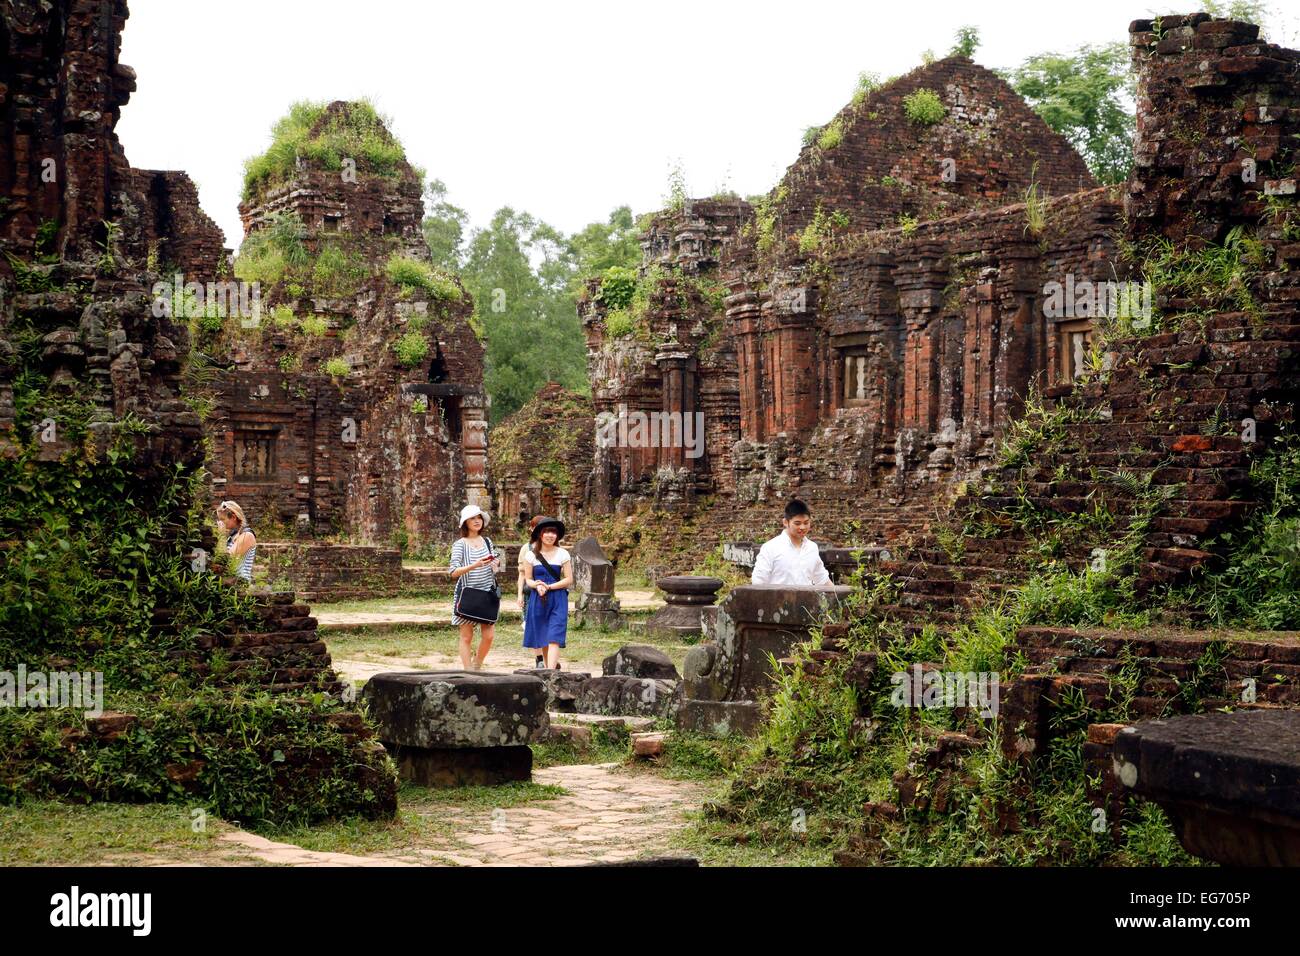 My Son temple ruins of the Cham, Vietnam. Stock Photo